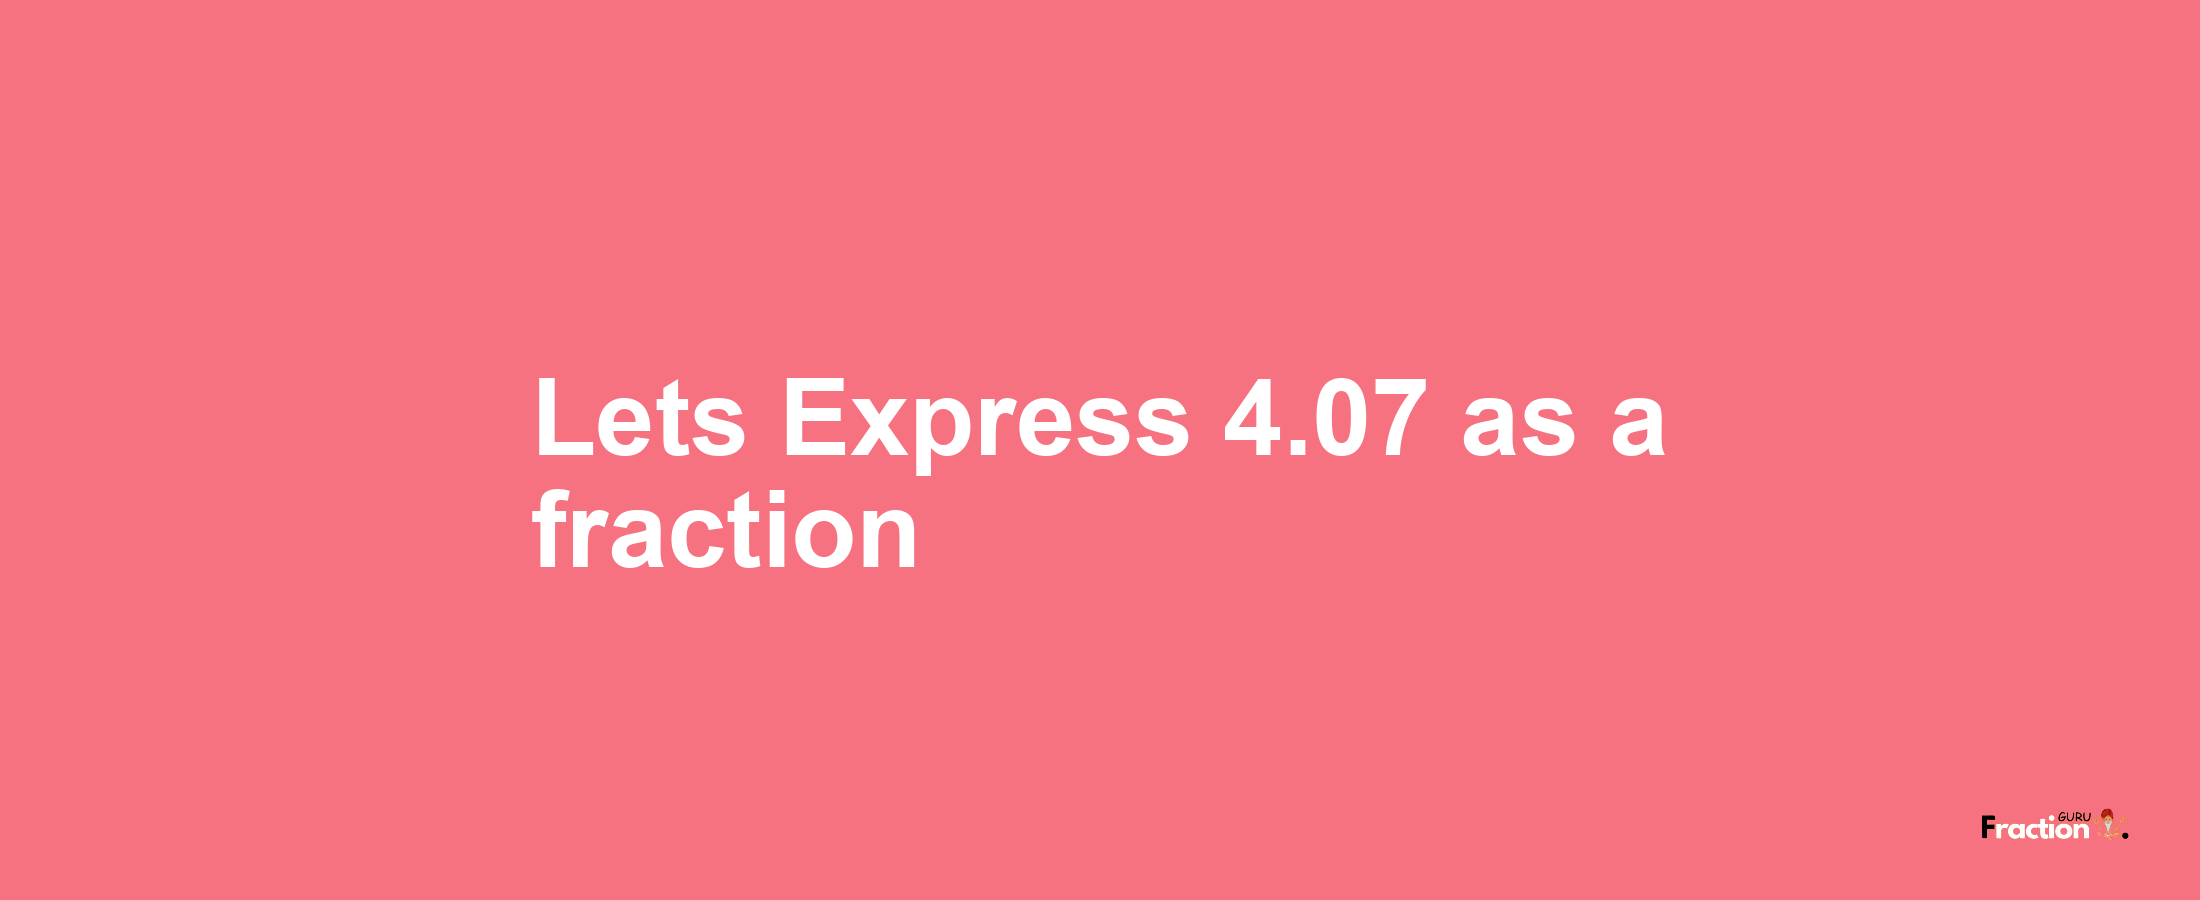 Lets Express 4.07 as afraction